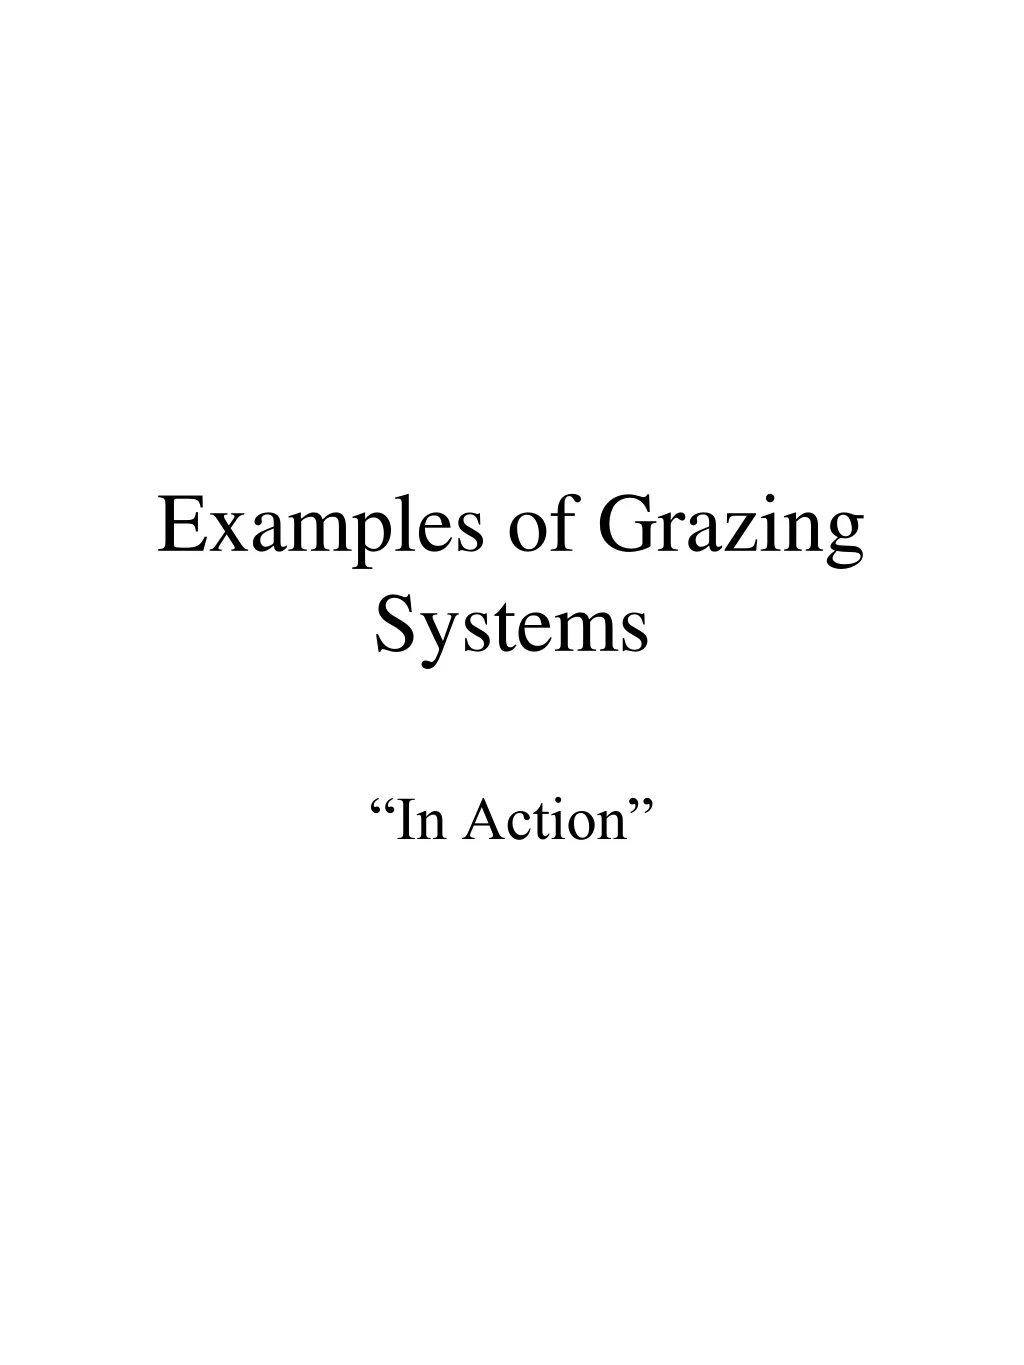 examples of grazing systems